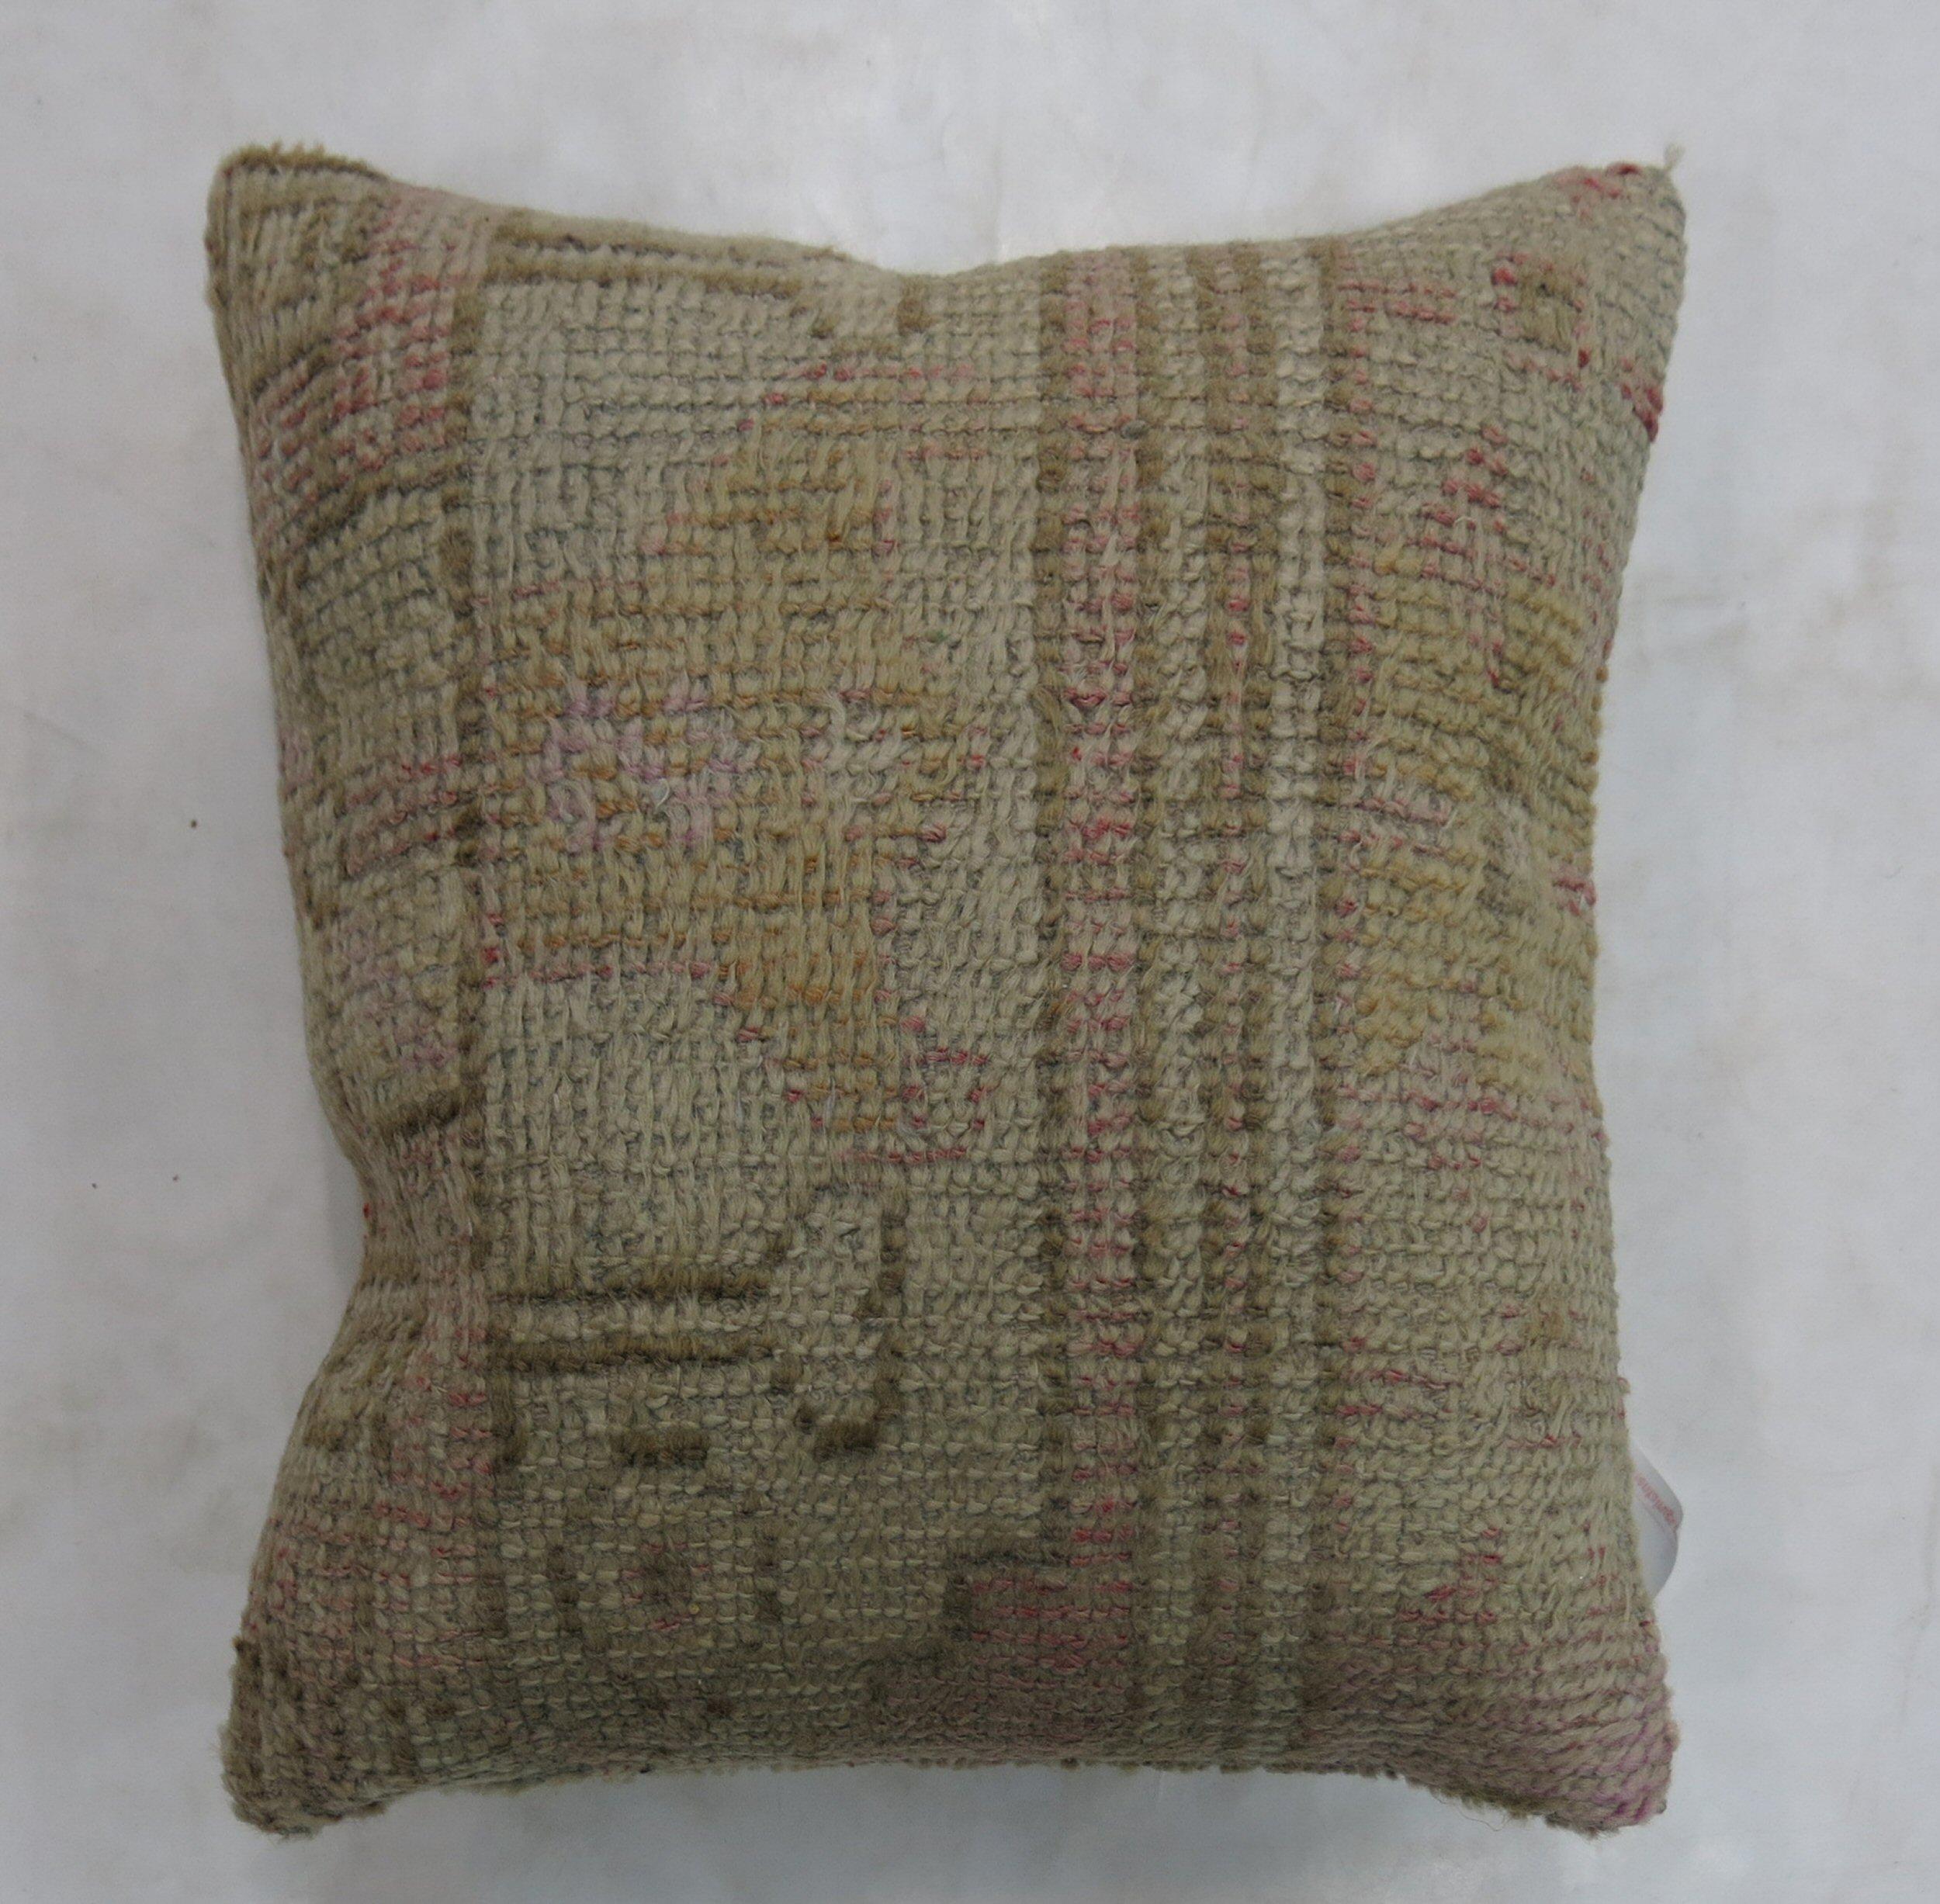 One of a Kind rug pillow made from a vintage Turkish Oushak with cotton back and zipper closure. Measures: 

16